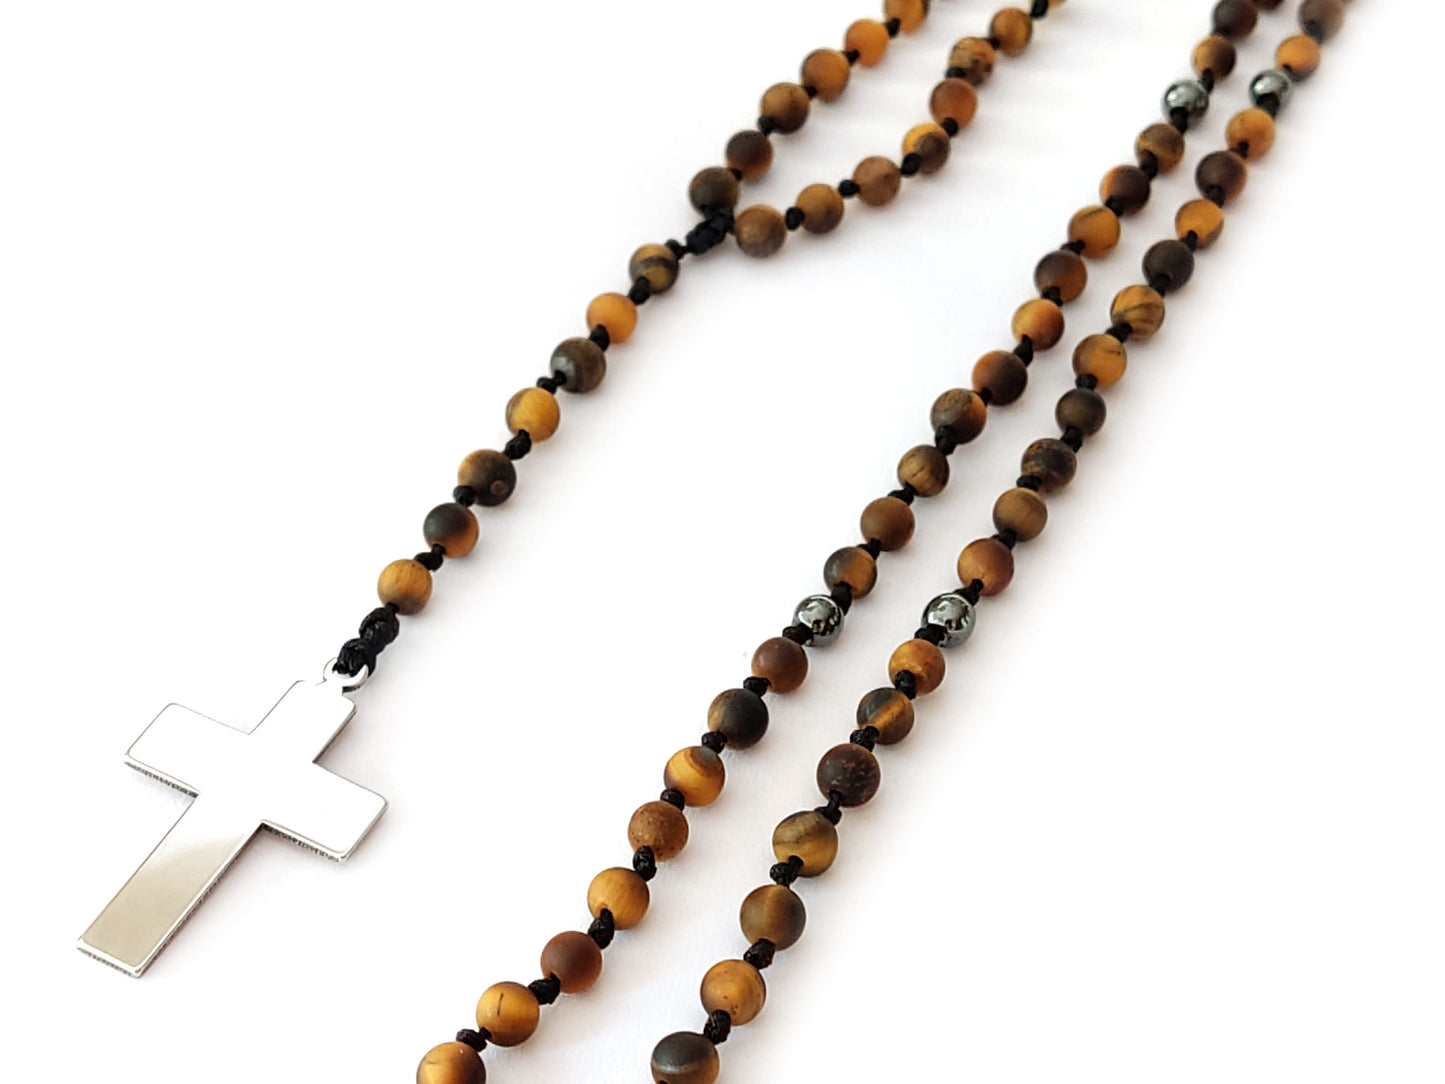 Exquisite Greek Handmade Rosary Necklace featuring Tiger's Eye gemstones.